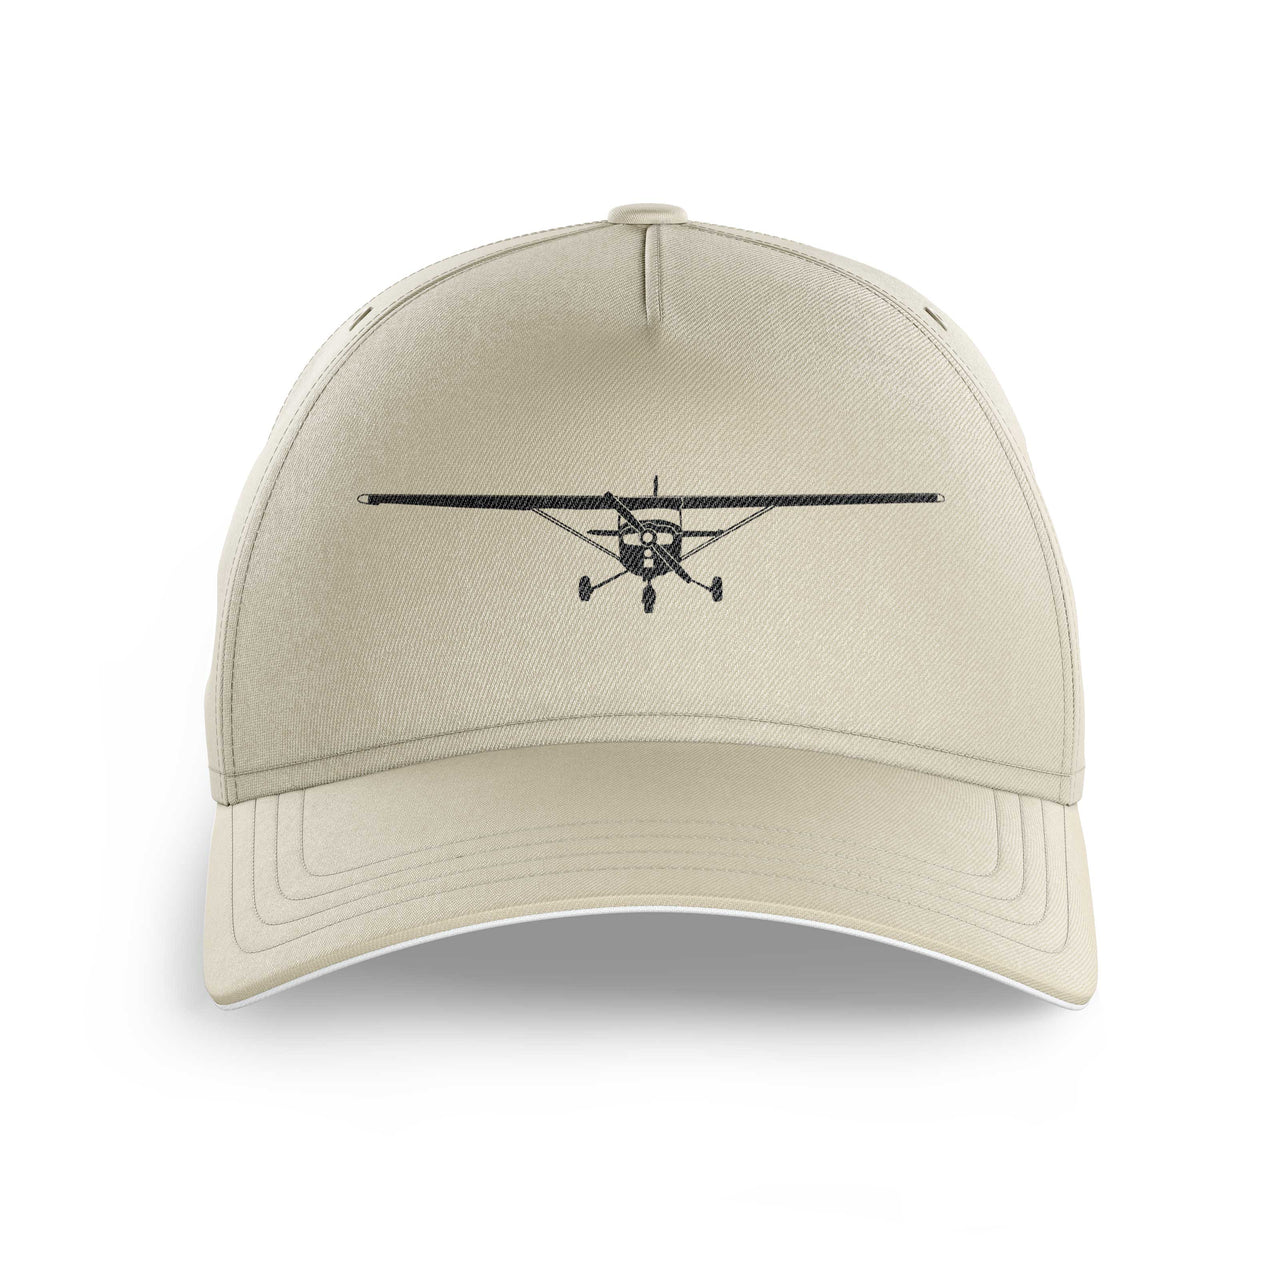 Cessna 172 Silhouette Printed Hats